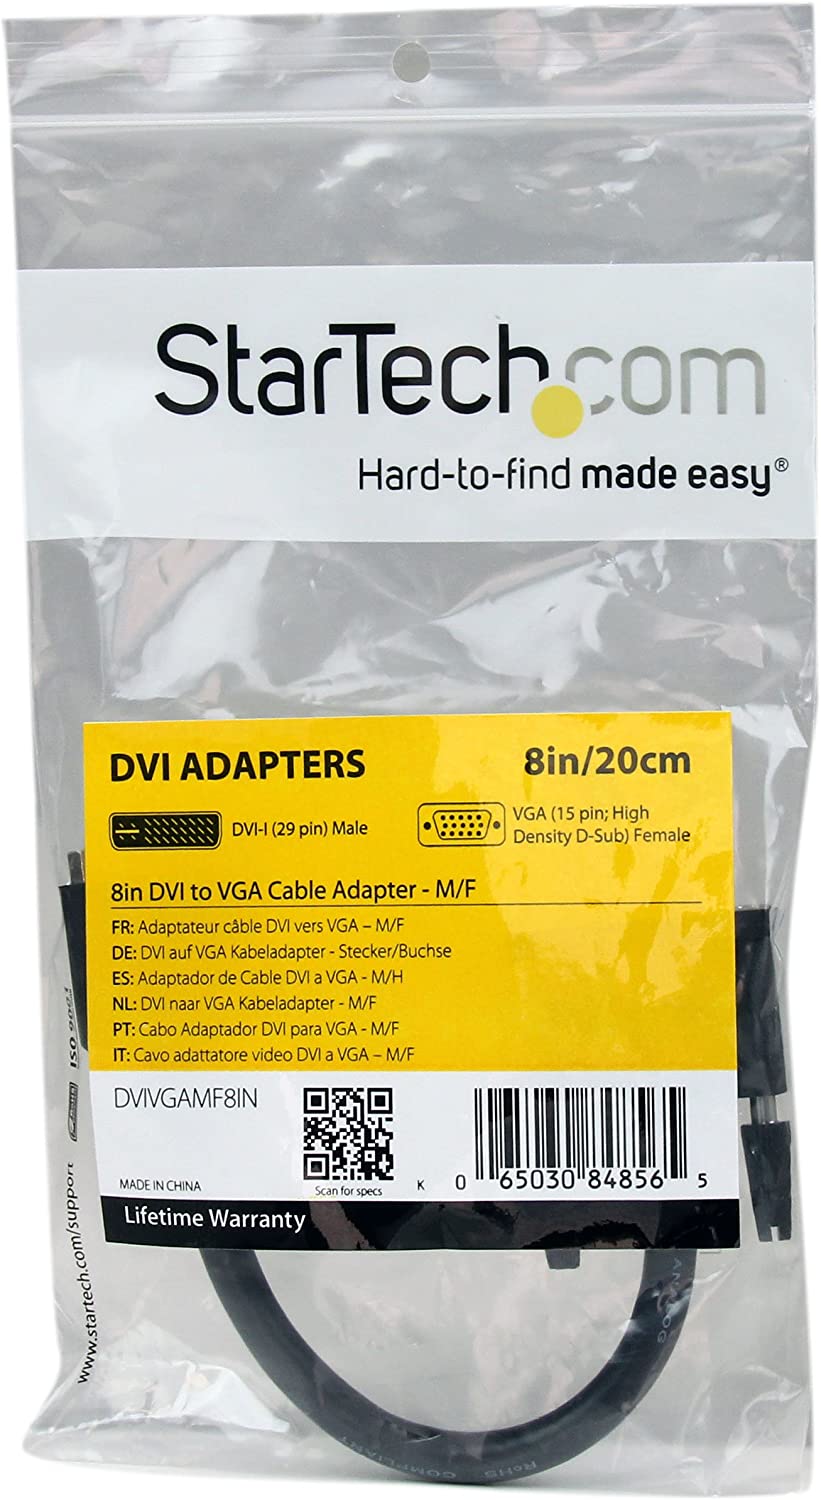 StarTech.com 8in DVI to VGA Cable Adapter - DVI-I Male to VGA Female Dongle Adapter (DVIVGAMF8IN) Black DVI Male to VGA Female (Cable)